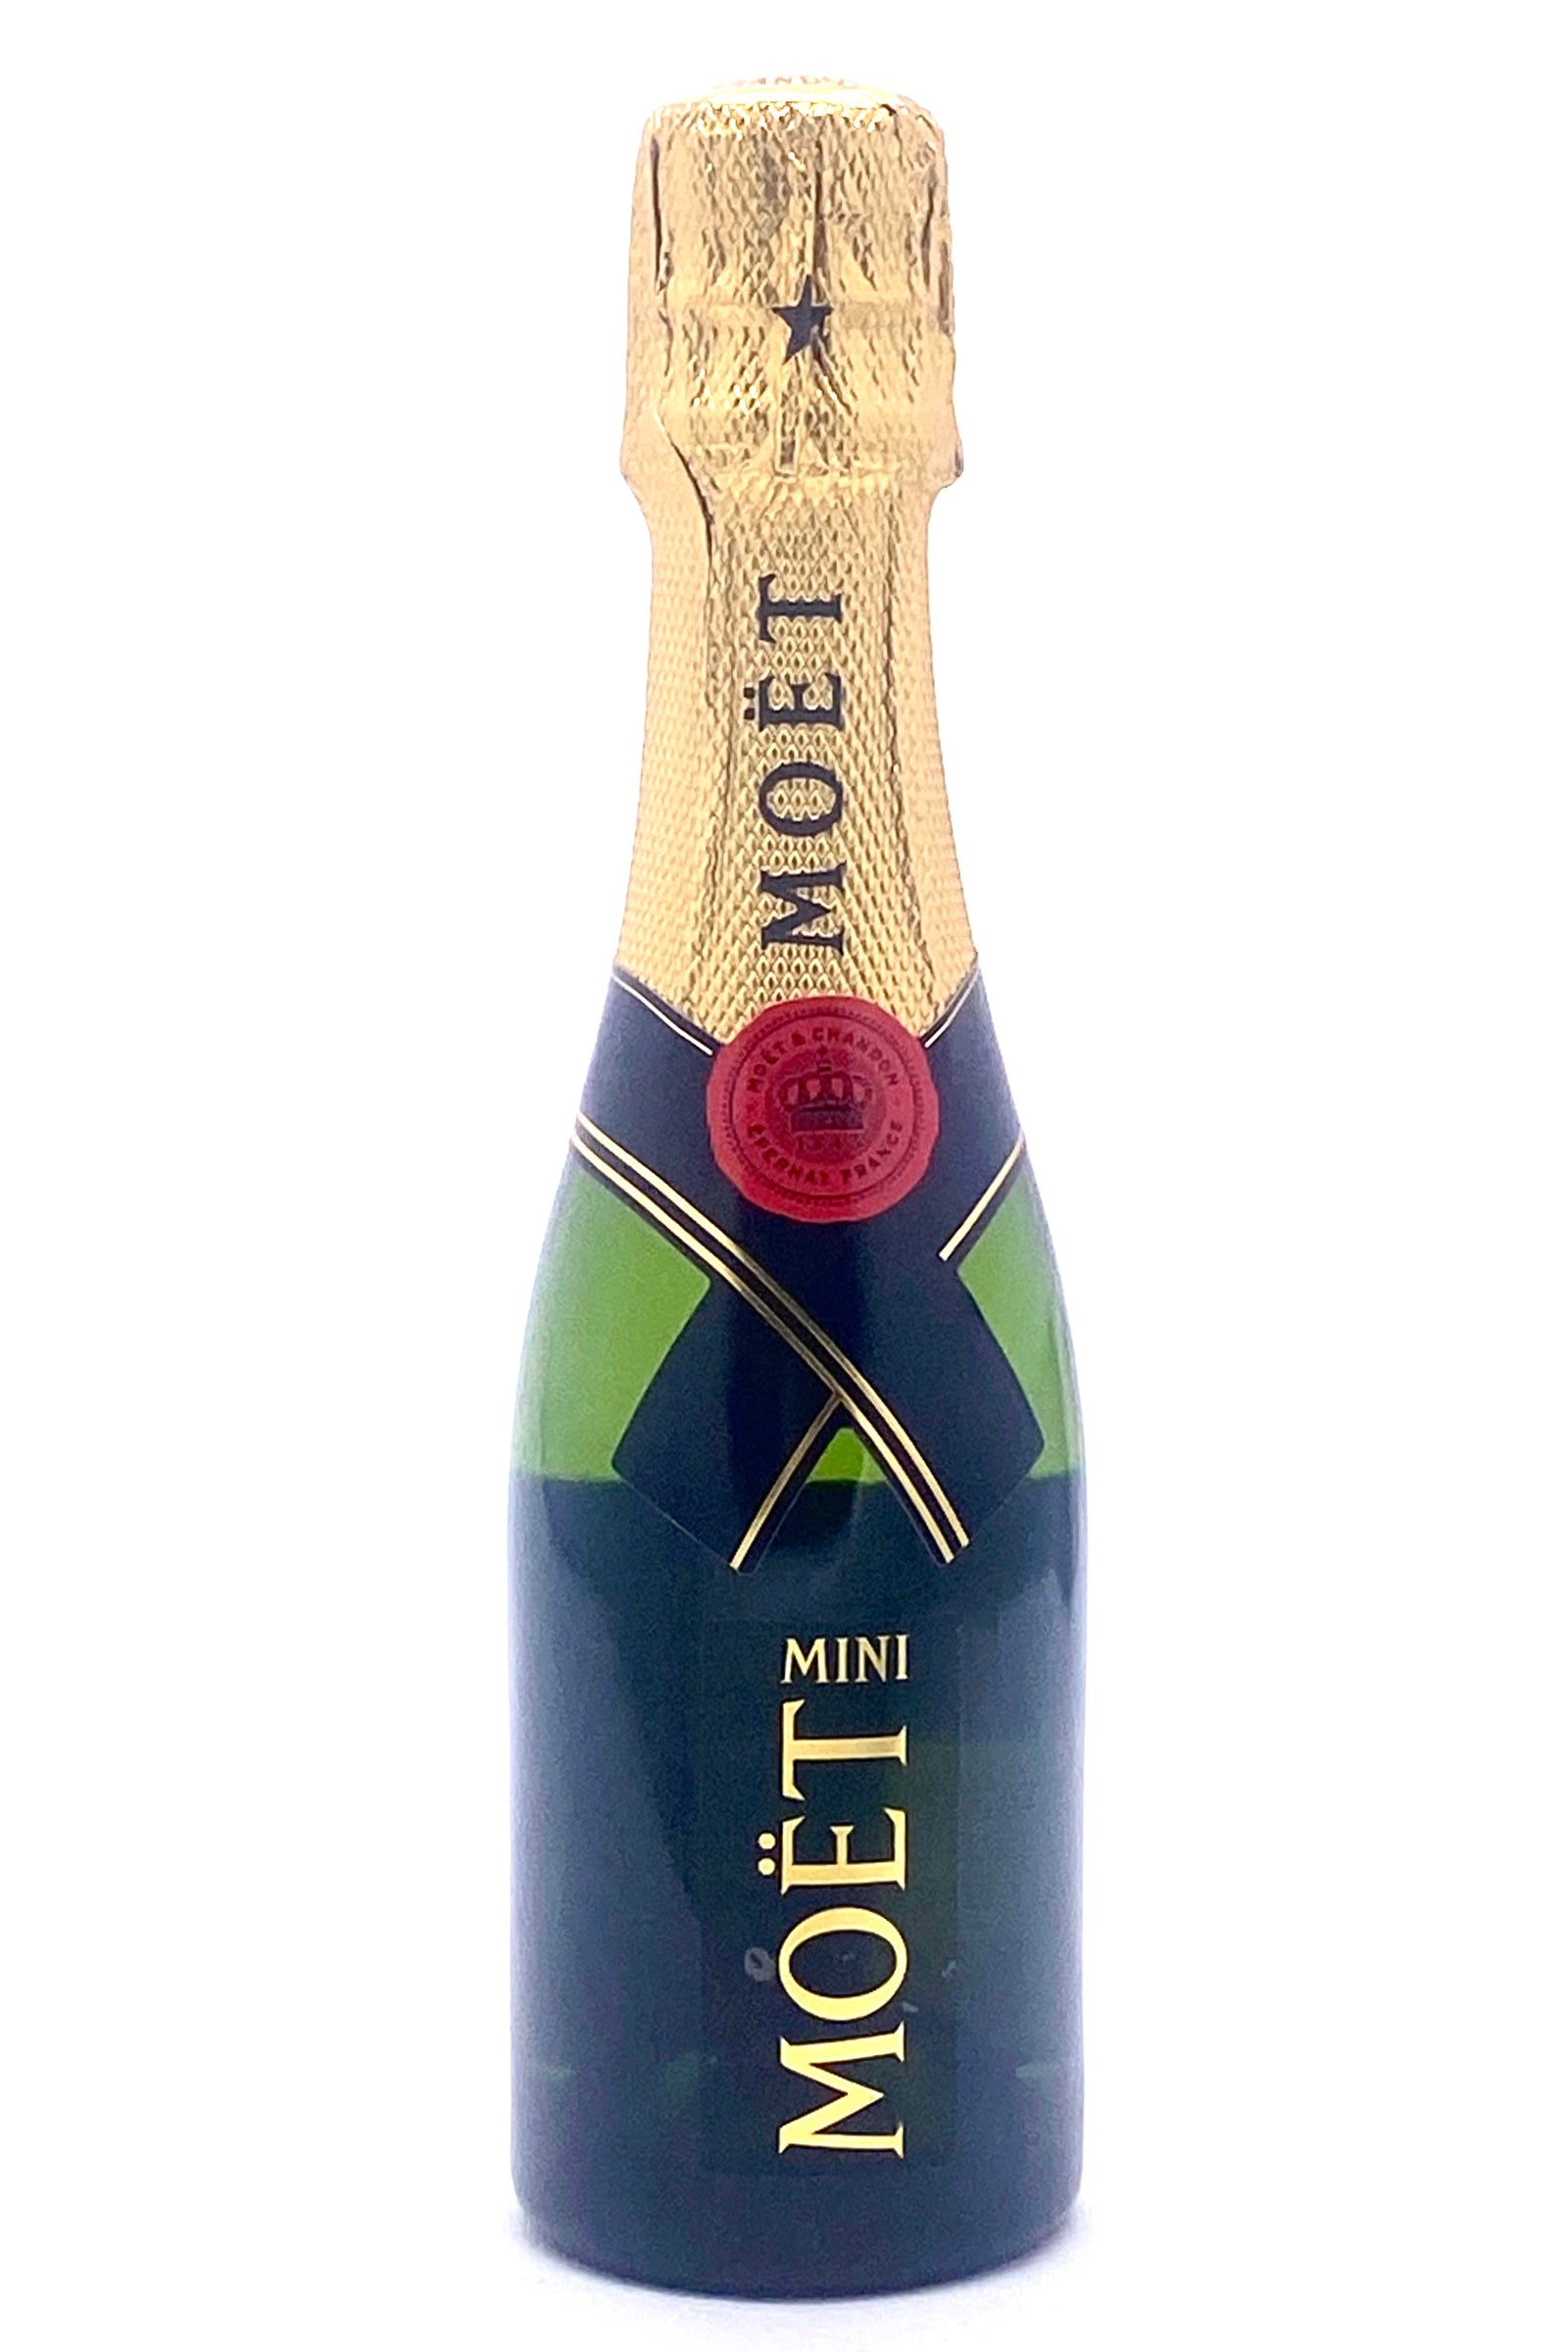 Celebrate with Moet Chandon Champagnes and Sparkling Wines - Blackwell's  Wines & Spirits